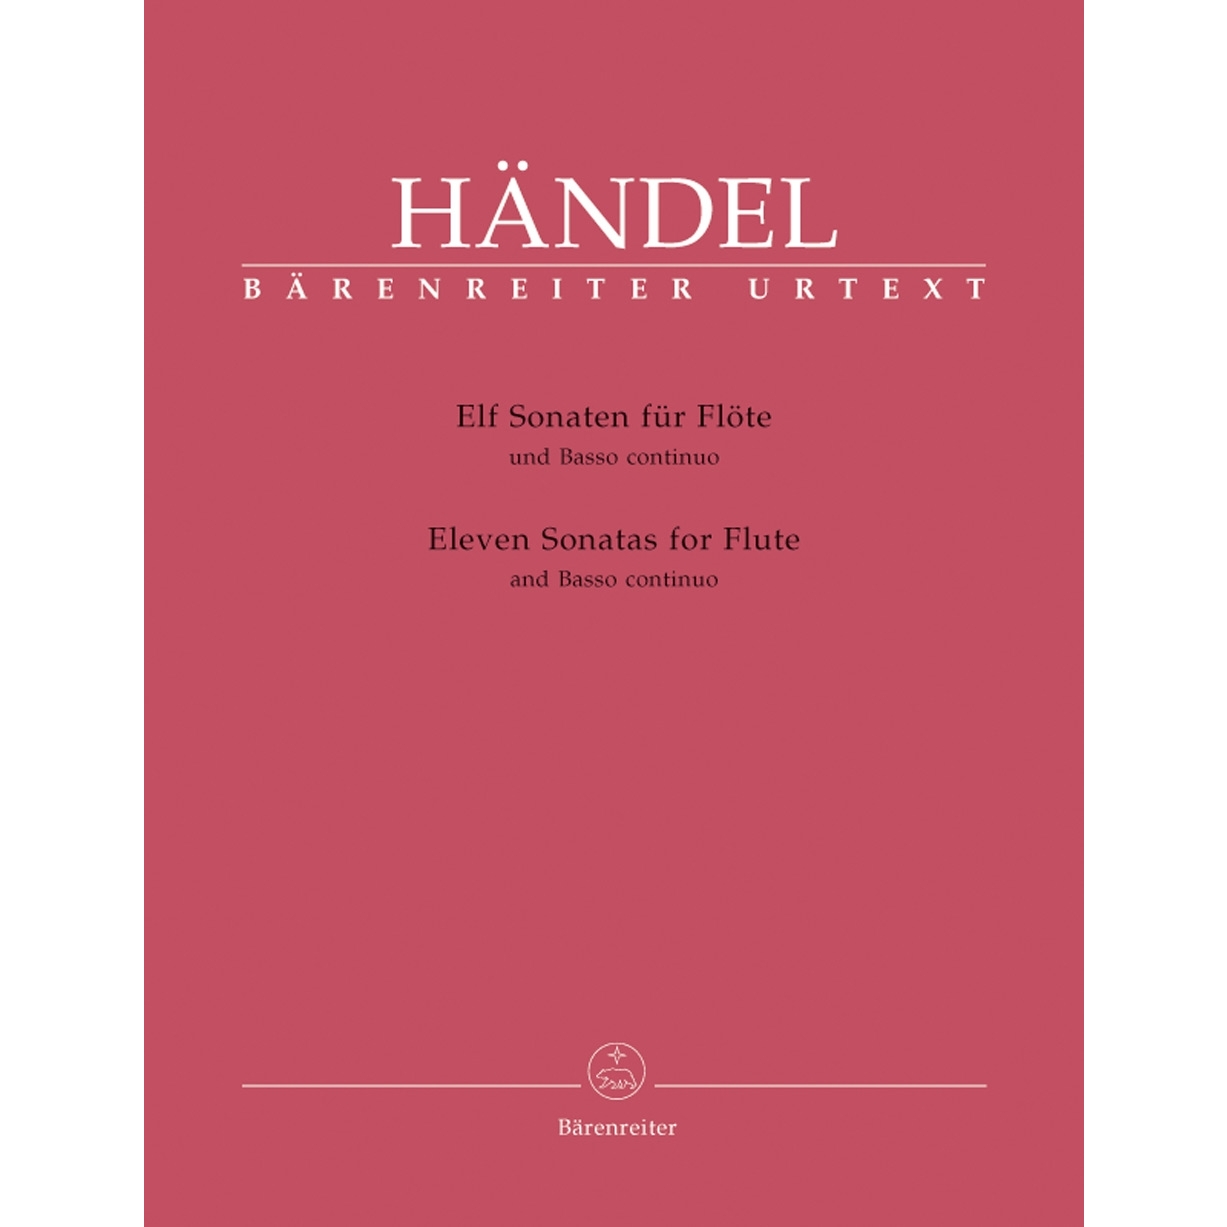 Eleven Sonatas Flute Händel. Just Flutes - Op1 Basso G.F. Continuo, and for